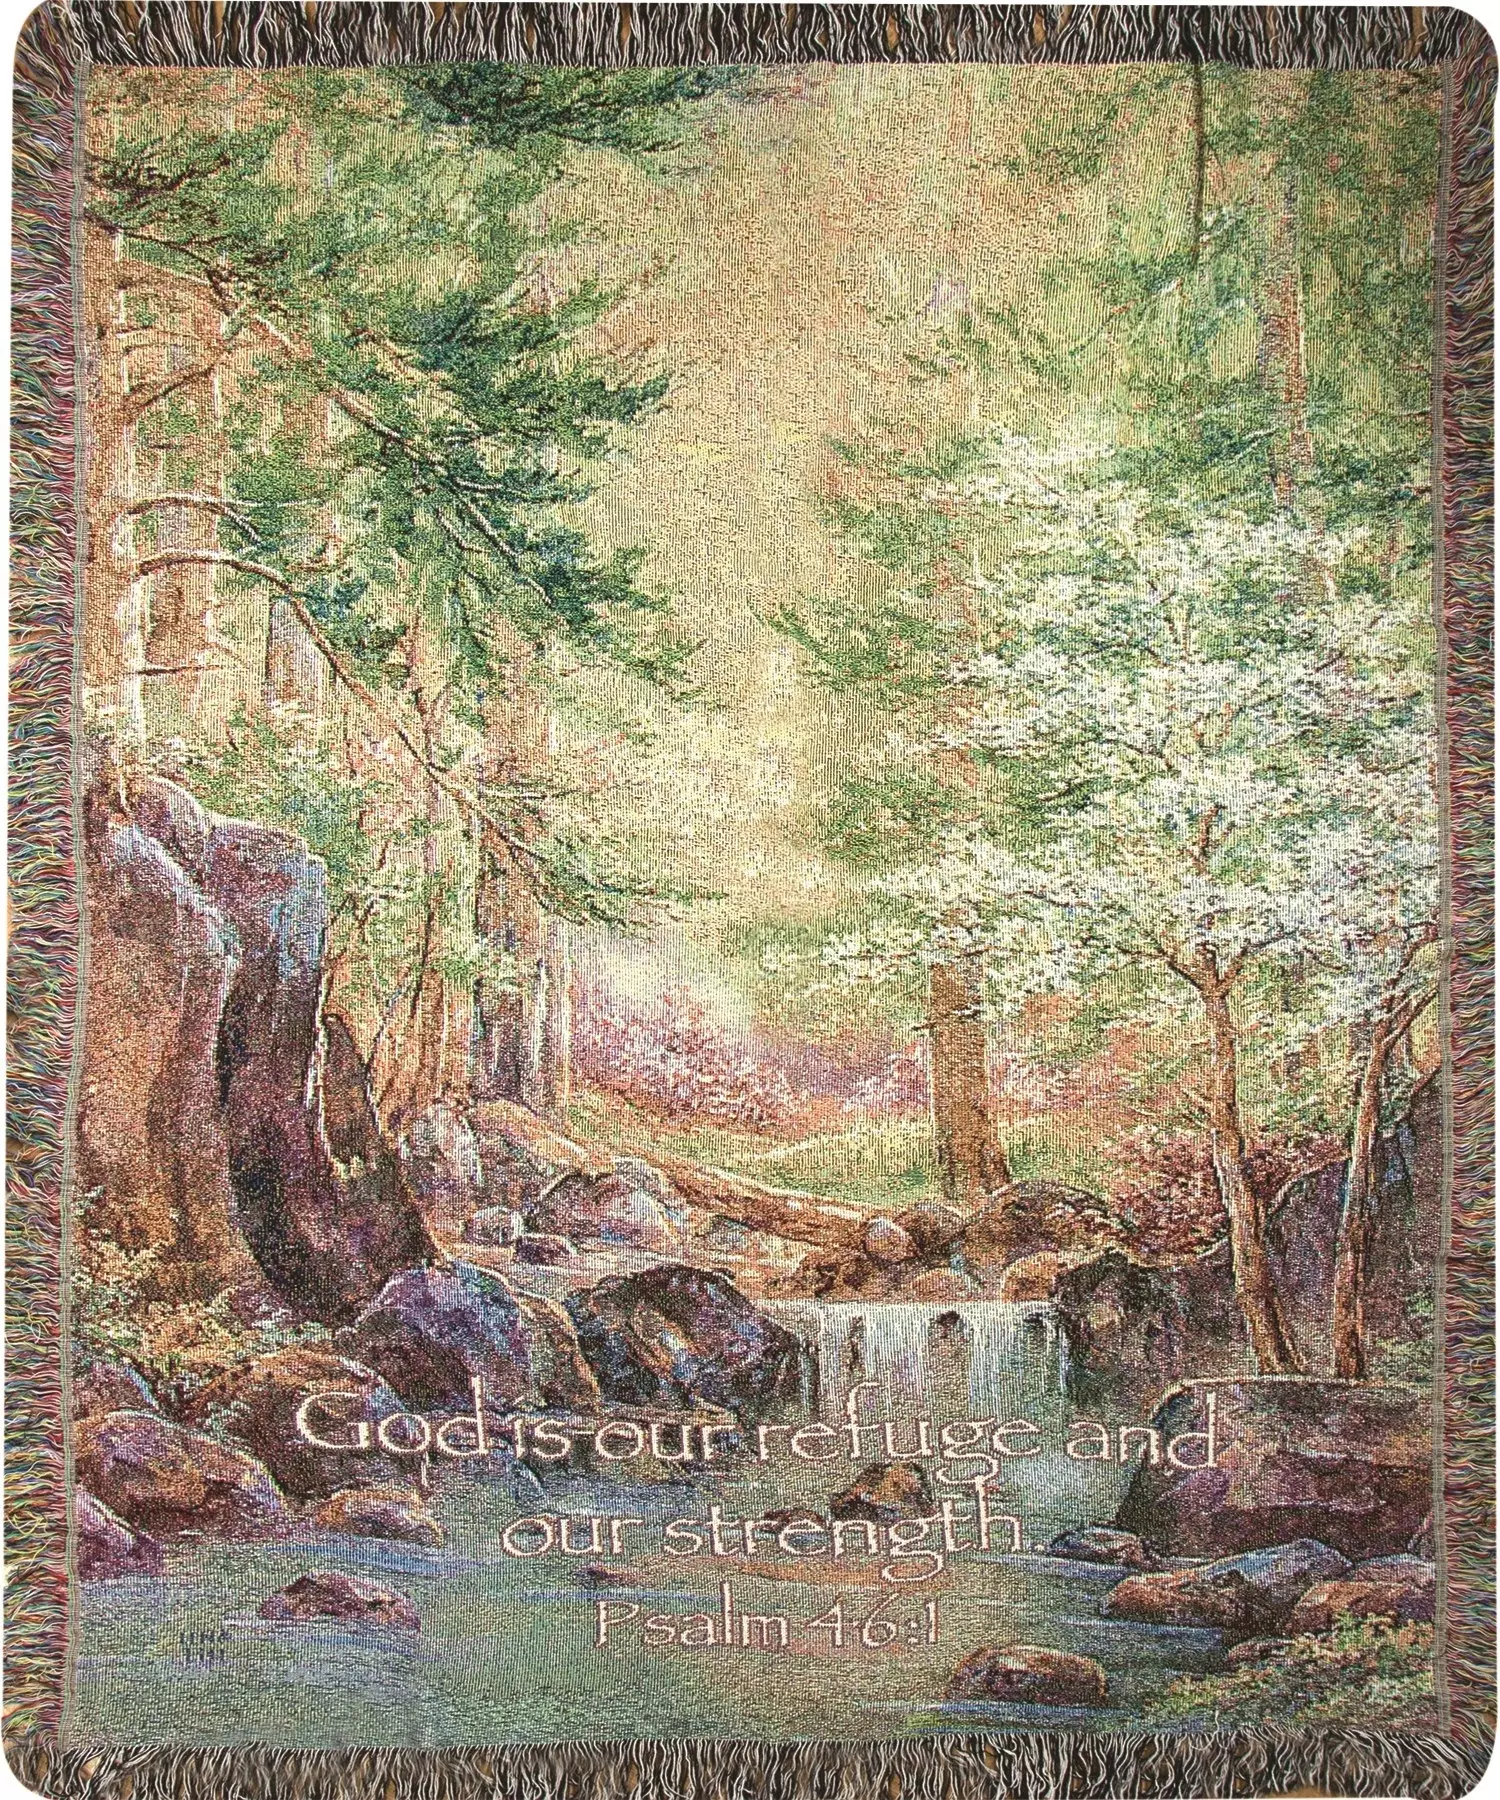 Throw-Nature's Retreat/God Is Our Refuge (Psalm 46:1)Tapestry (50" x 60")